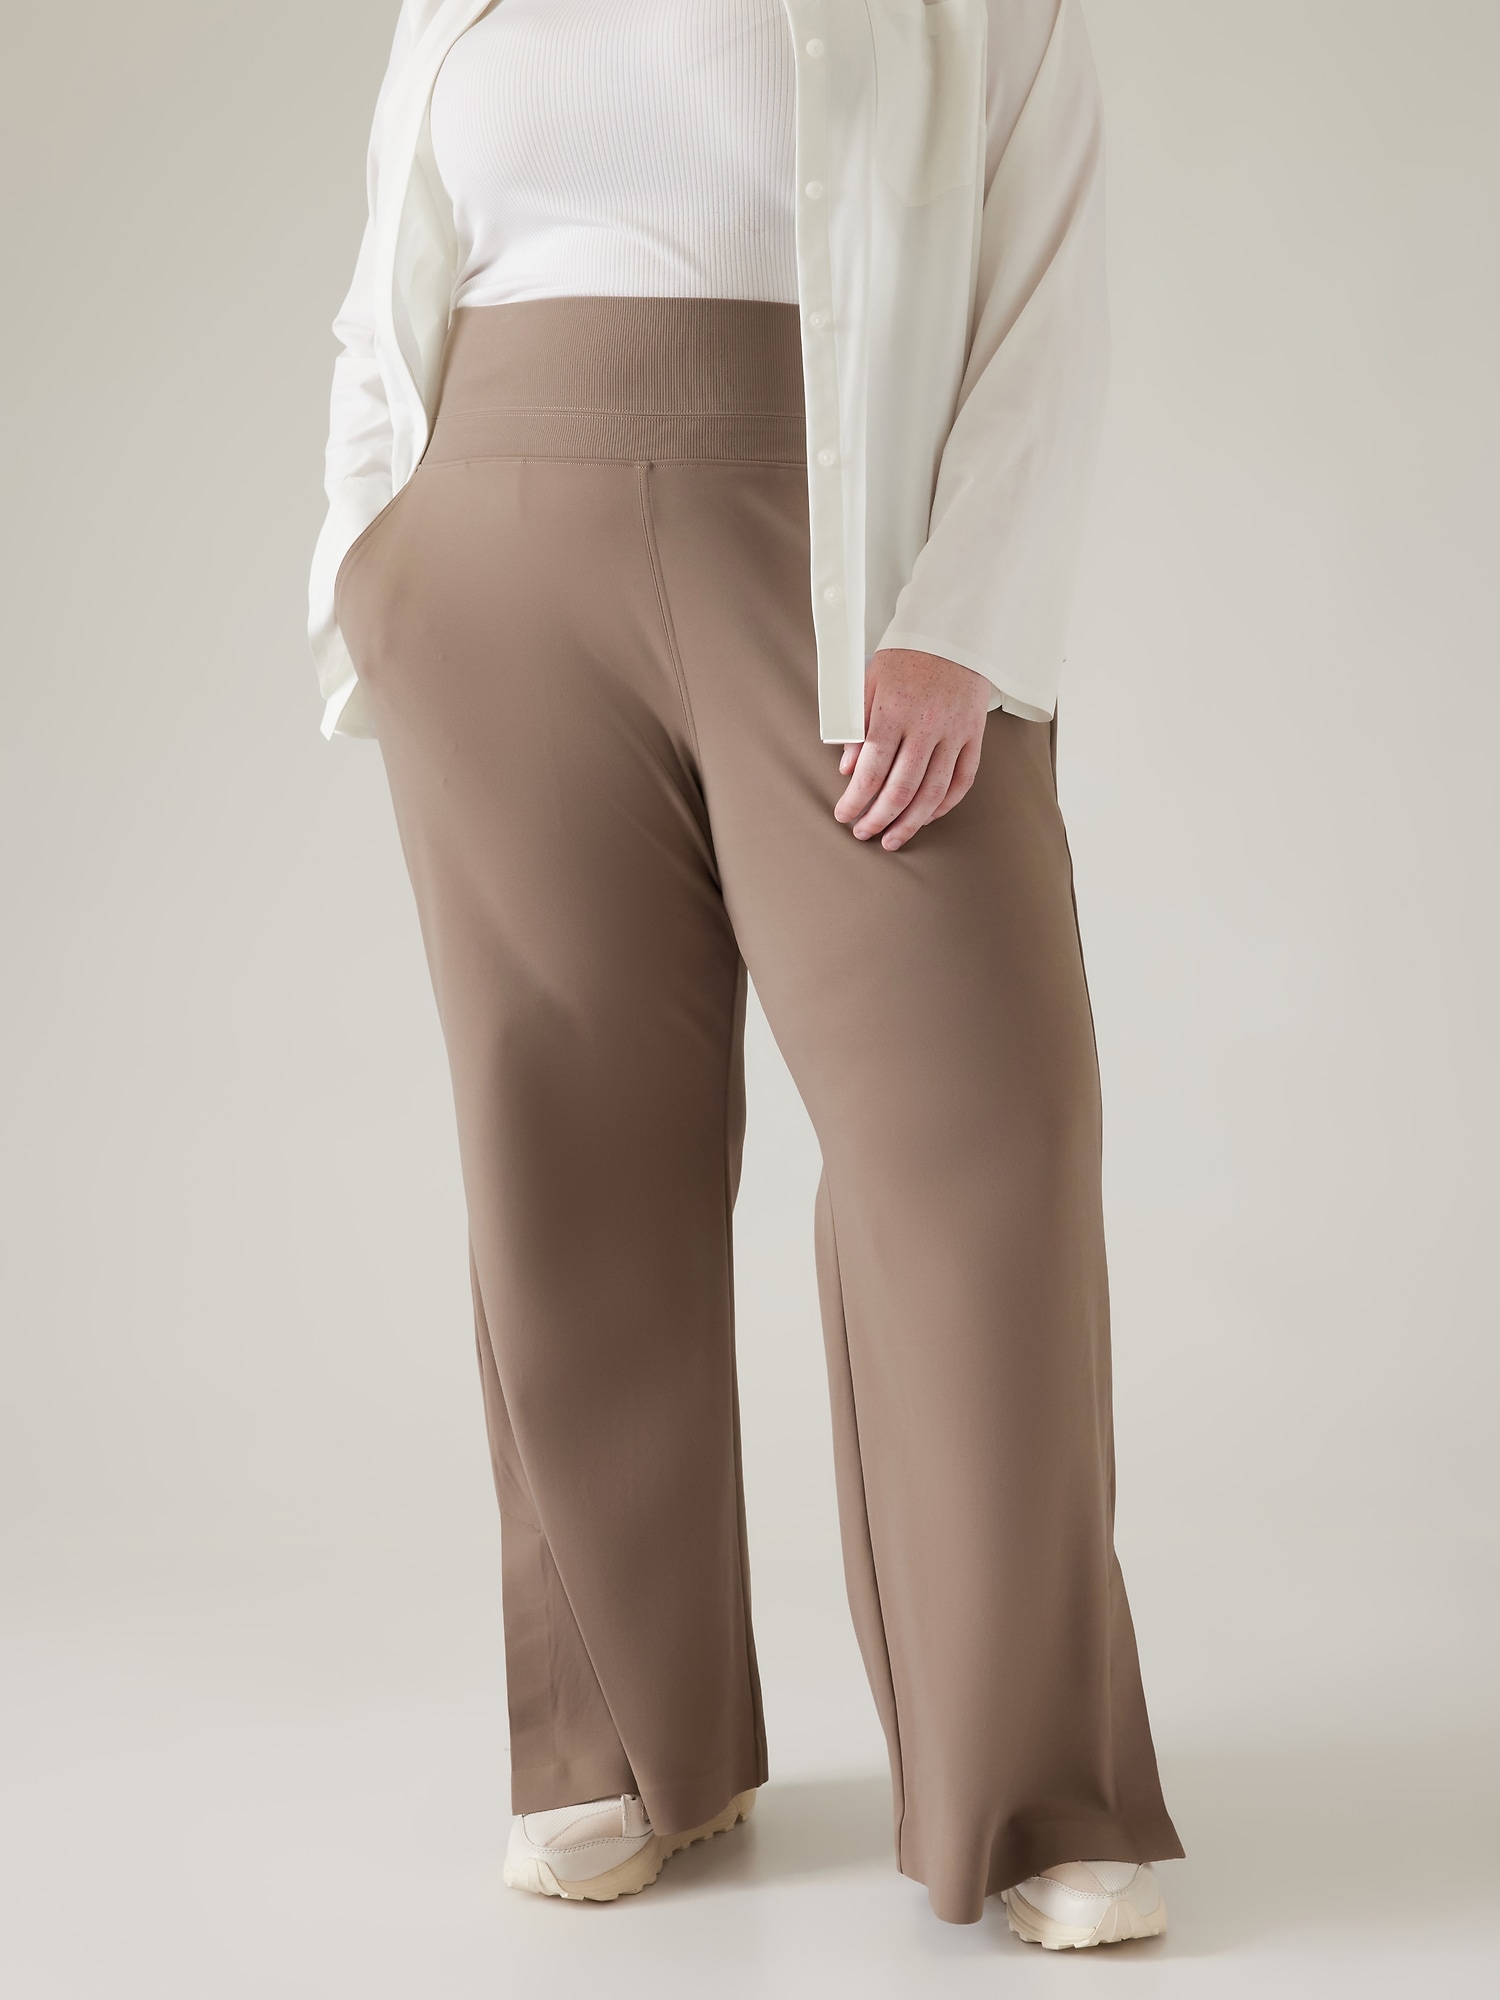 Athleta PLUS 1X Venice Flare Pant Mahogany Brown Pull-on Pants Stretch  Flared